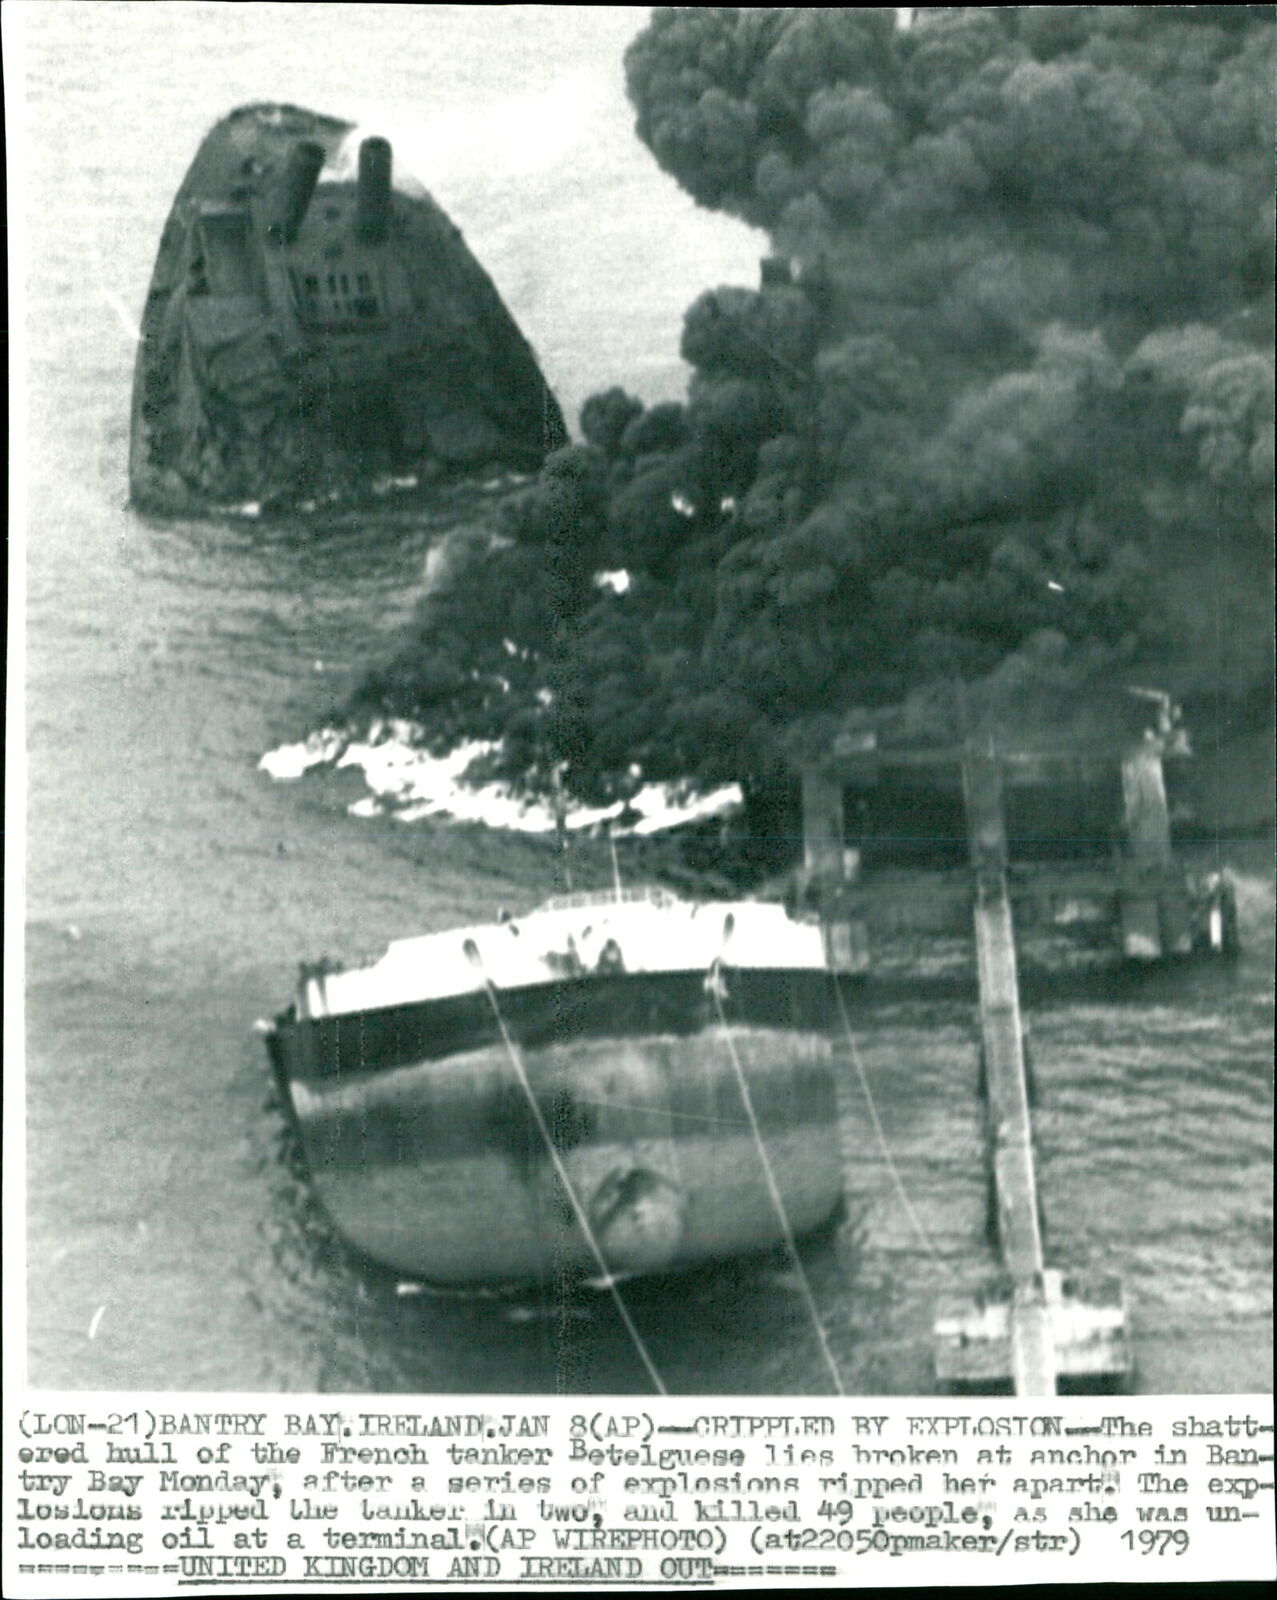 French tanker goes down - crippled by explosion - Vintage Photograph 2328652